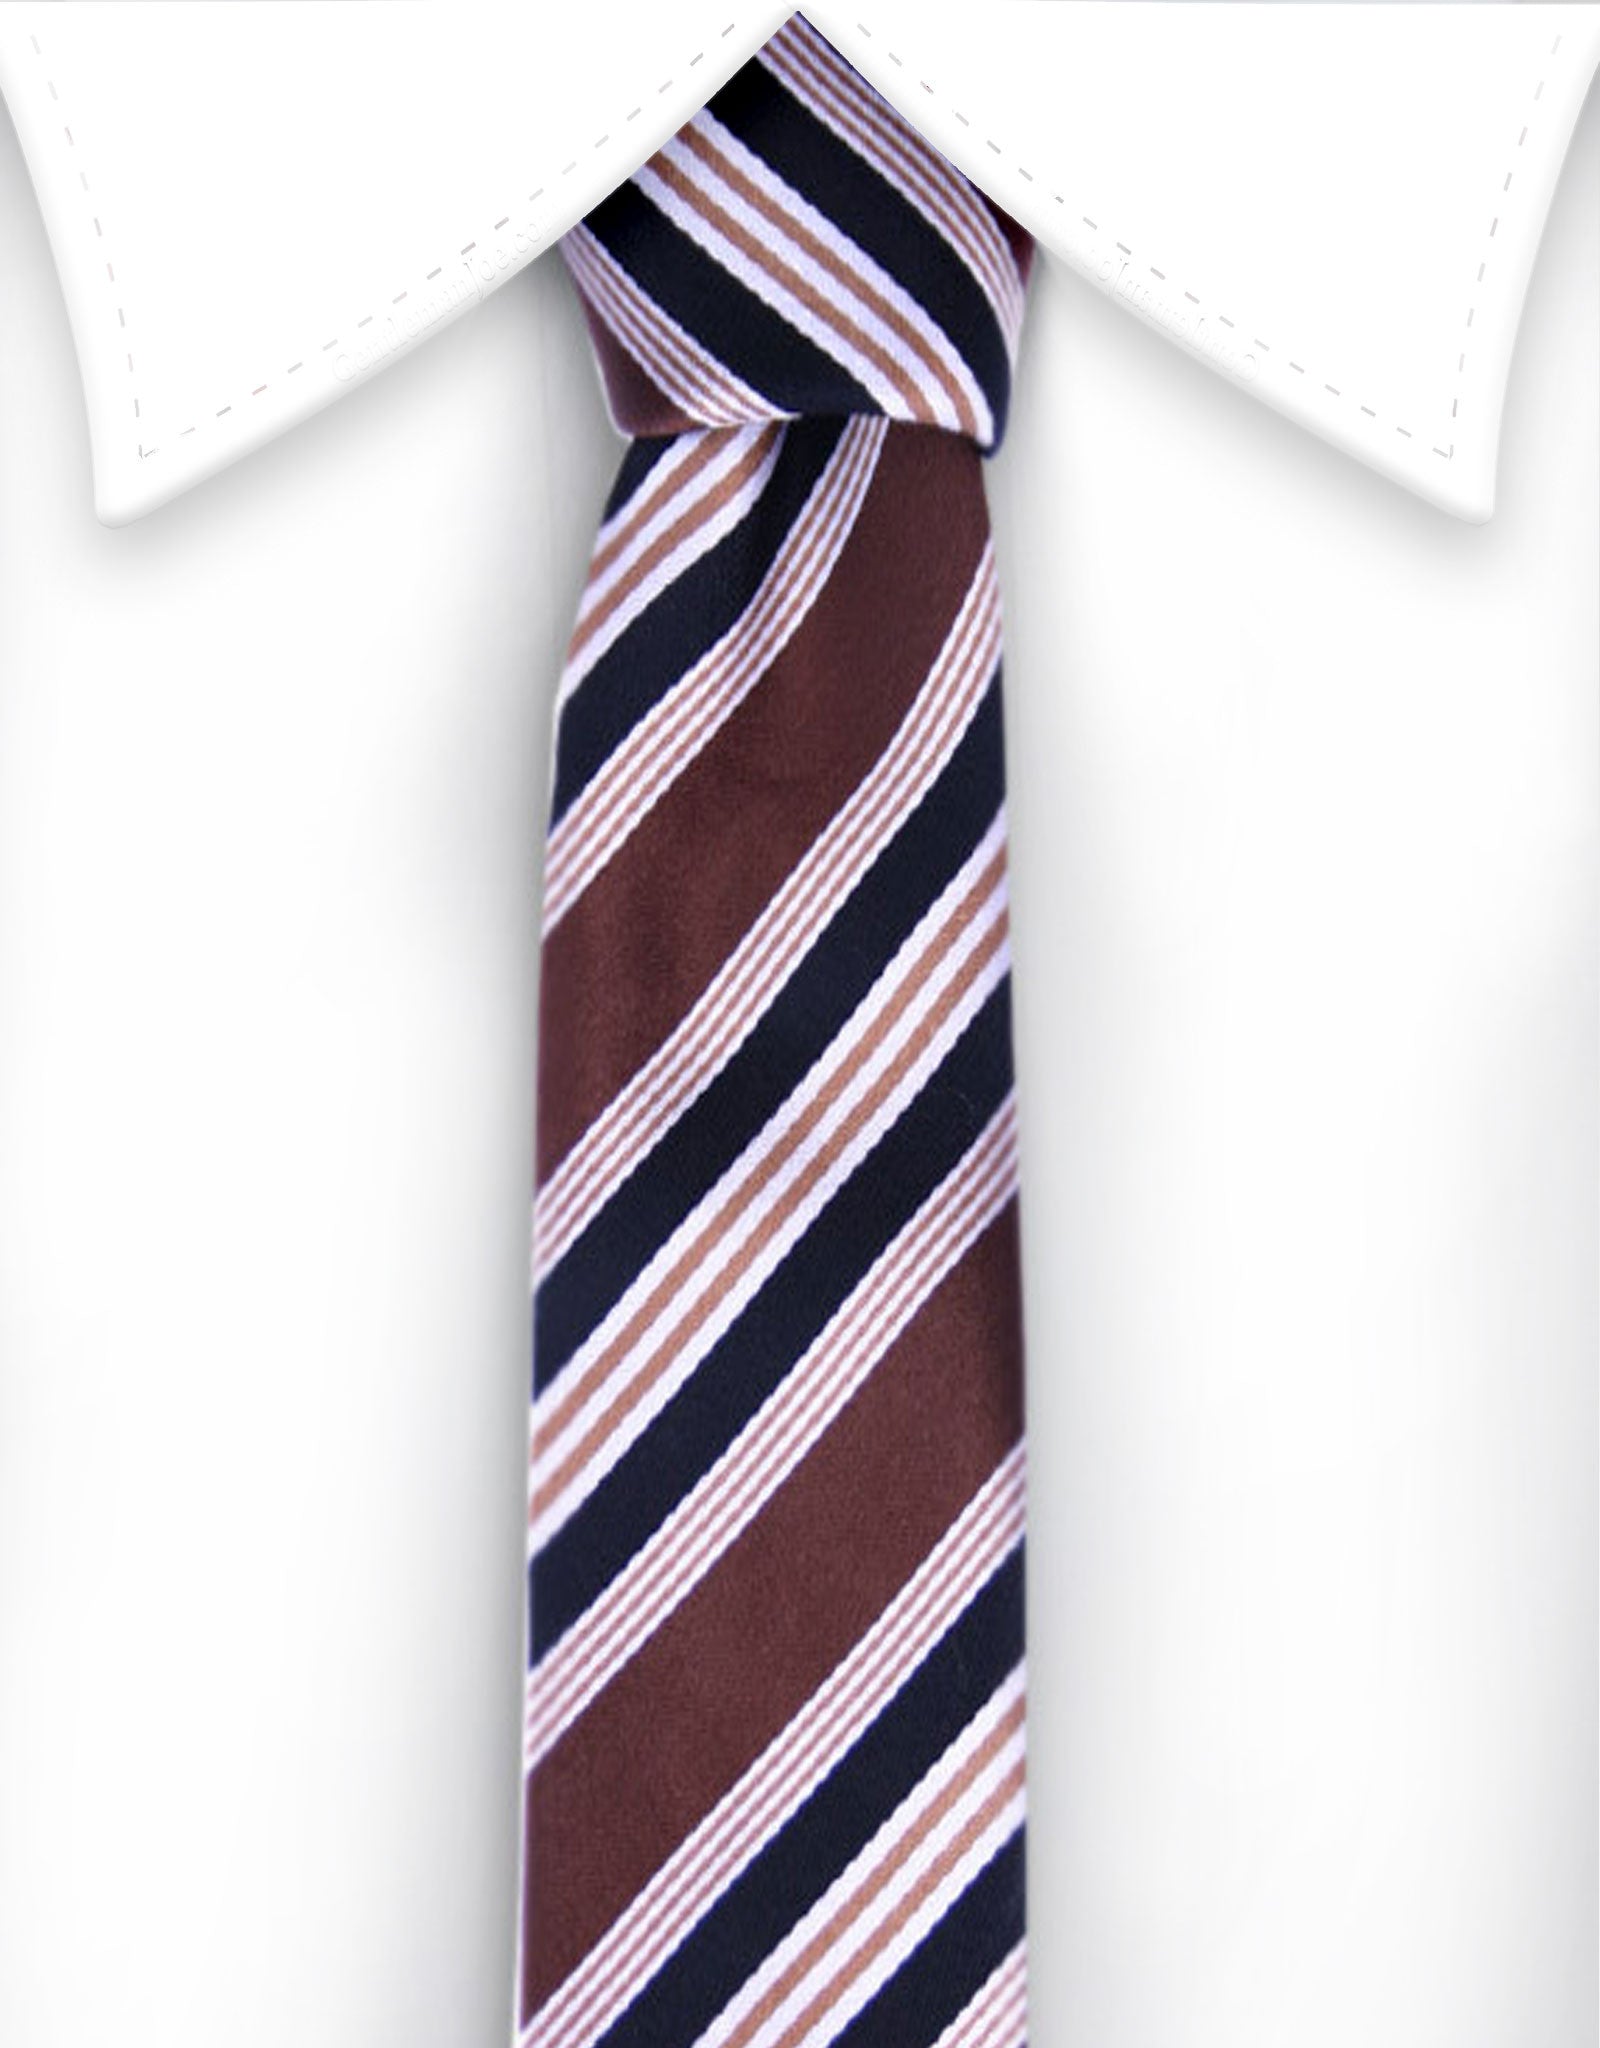 Brown and black striped narrow tie